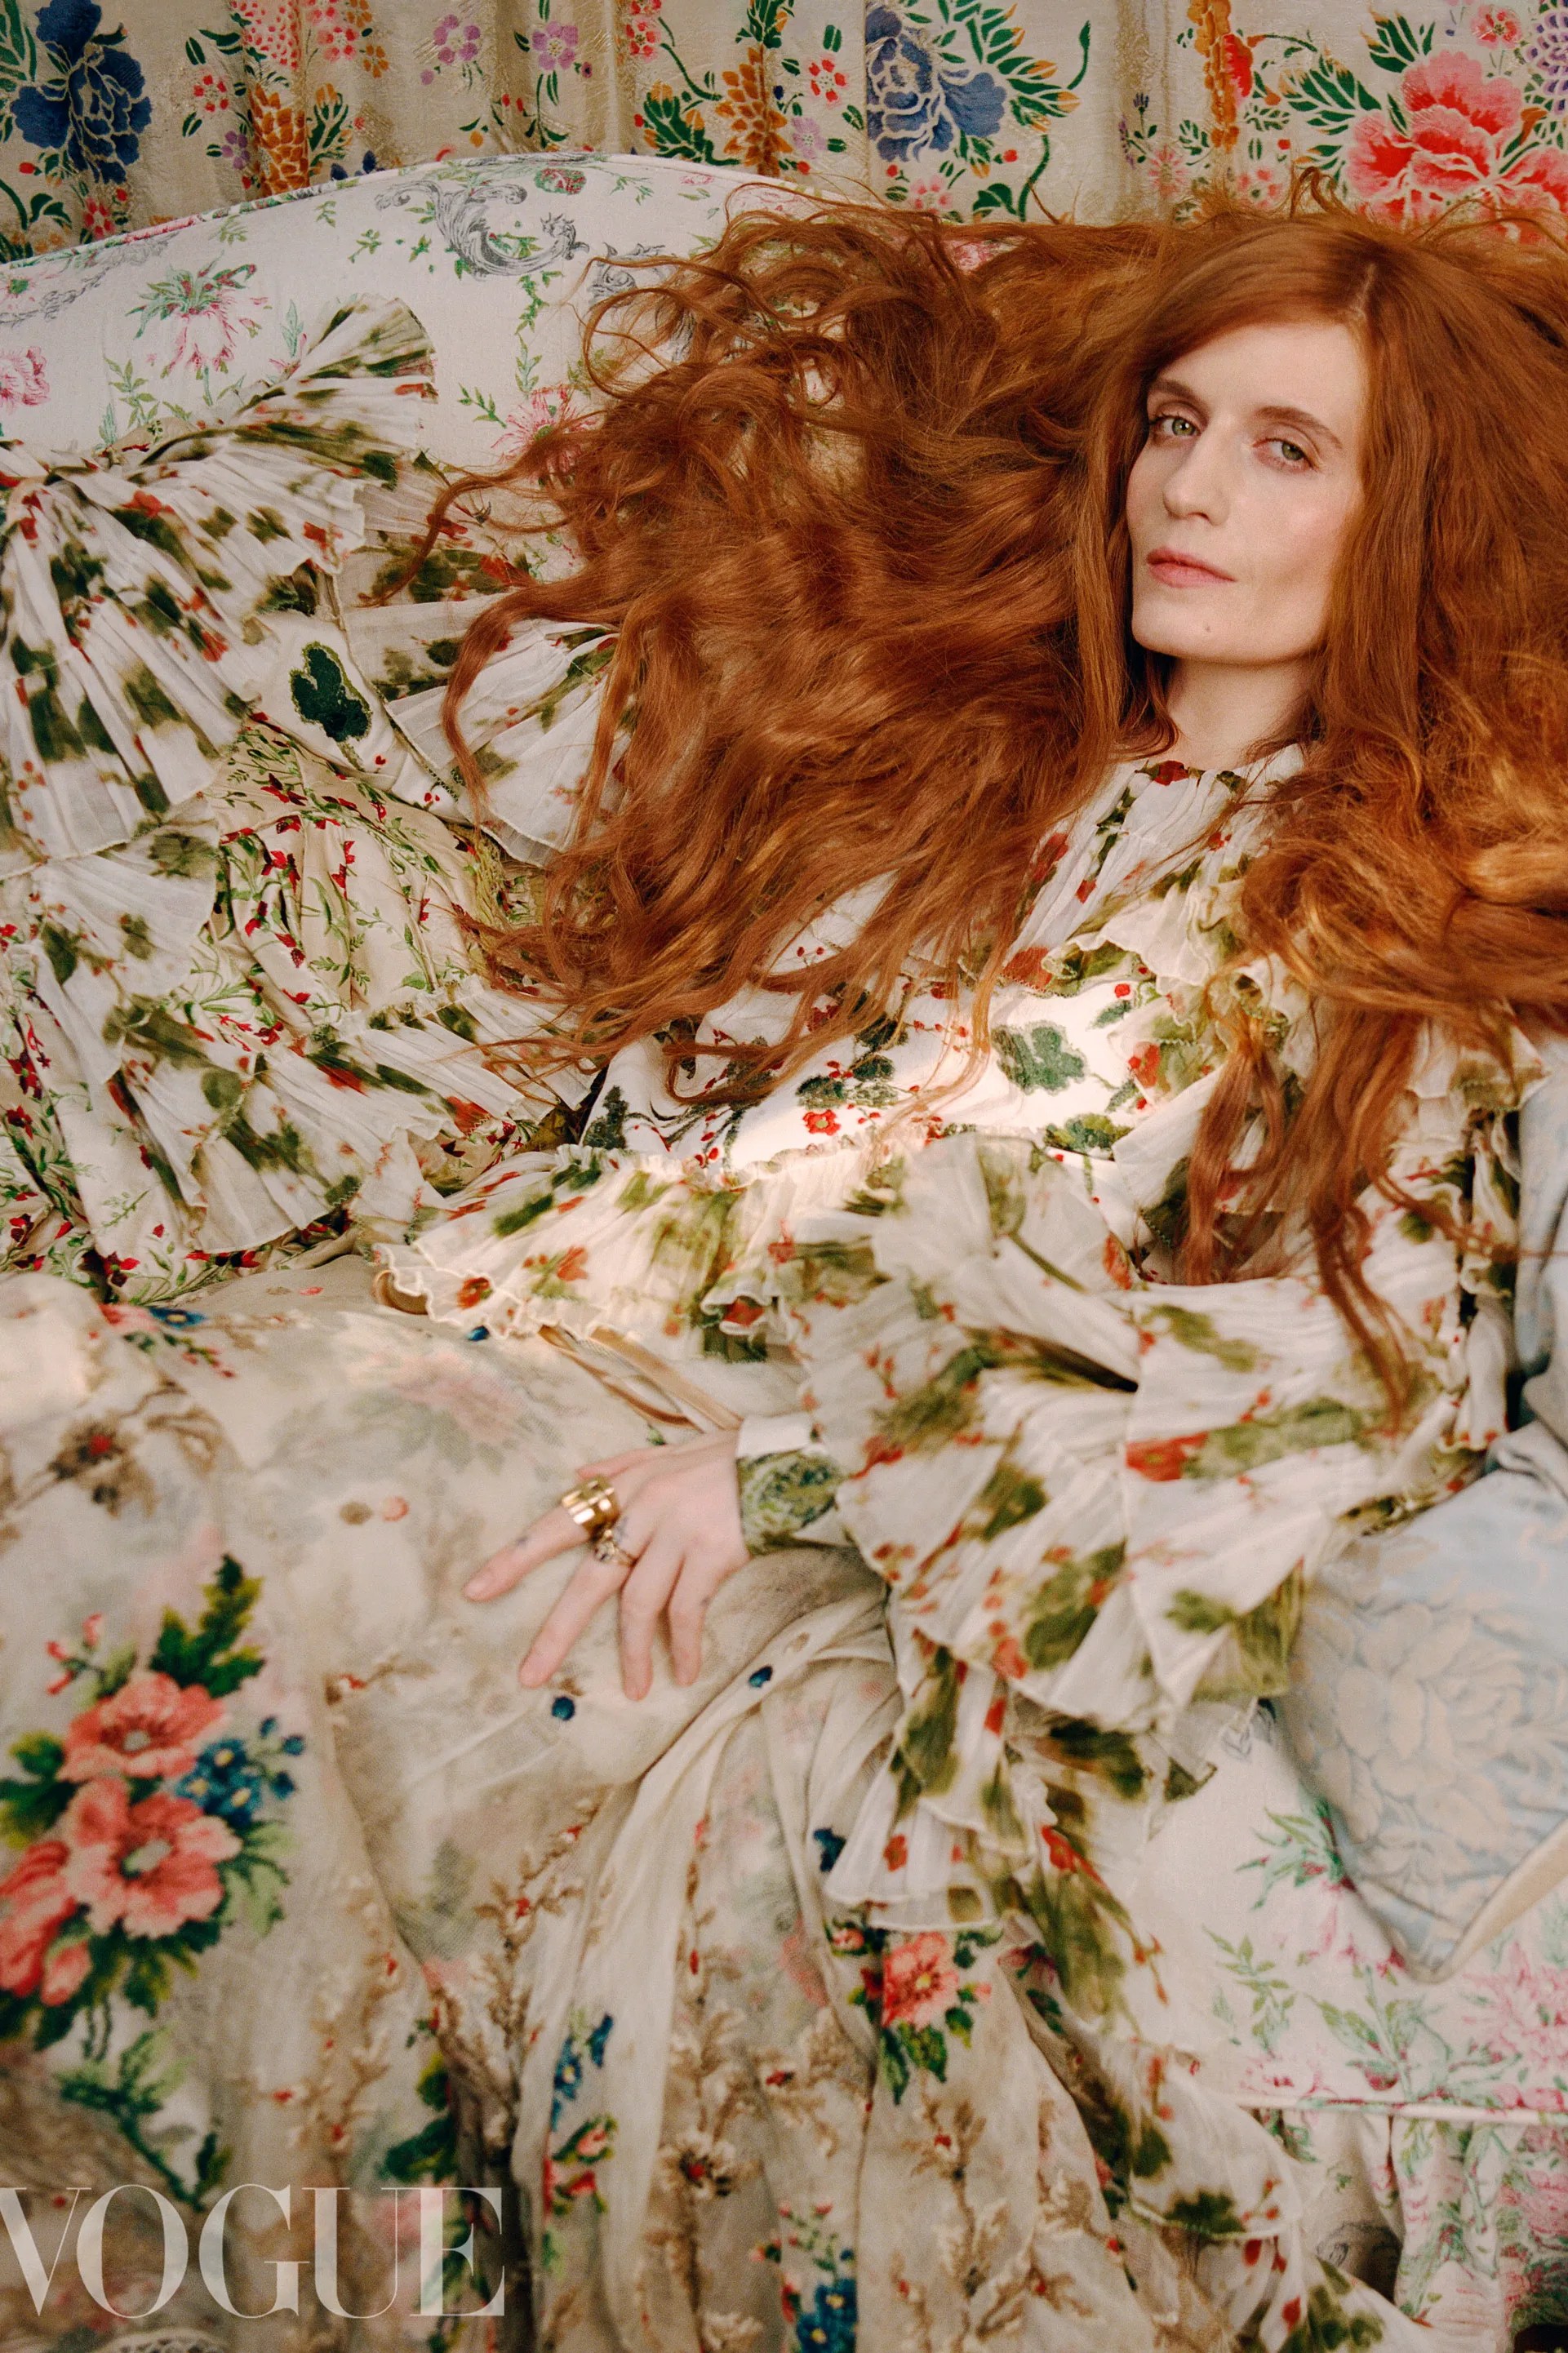 Florence Welch On Her New Album ‘Dance Fever’, Sobriety And The Lure Of